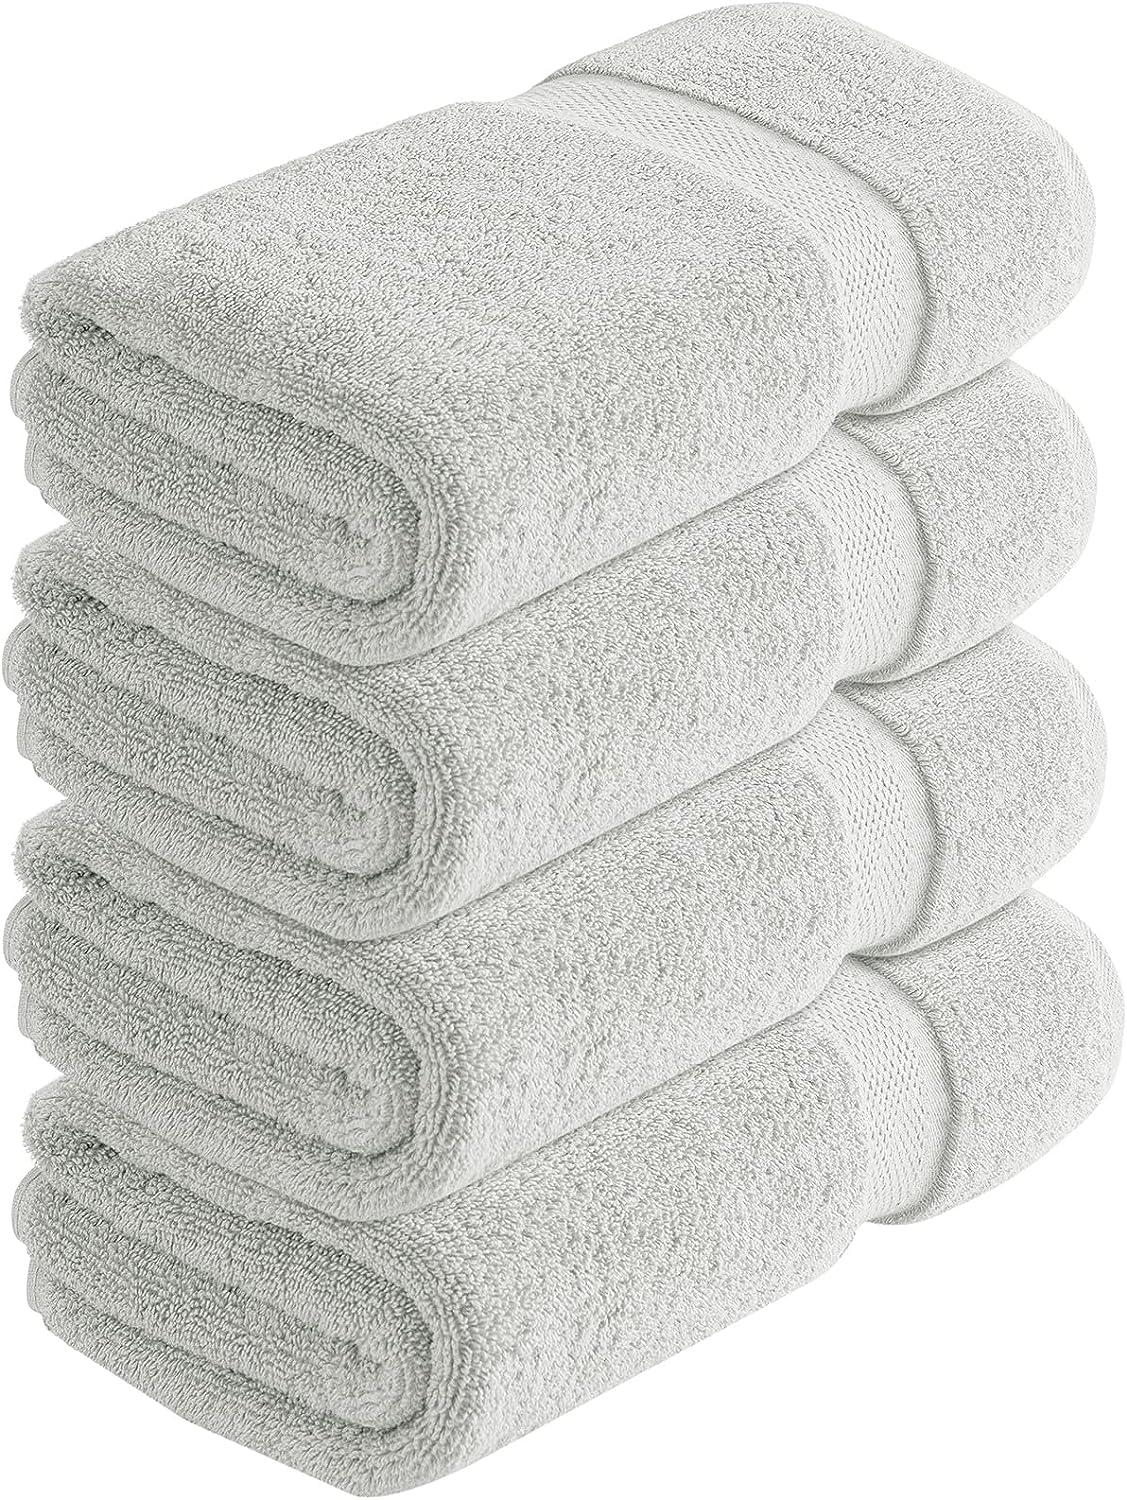 Oakias Kitchen Towels Grey (12 Pack, 16 x 26 Inches) – Cotton